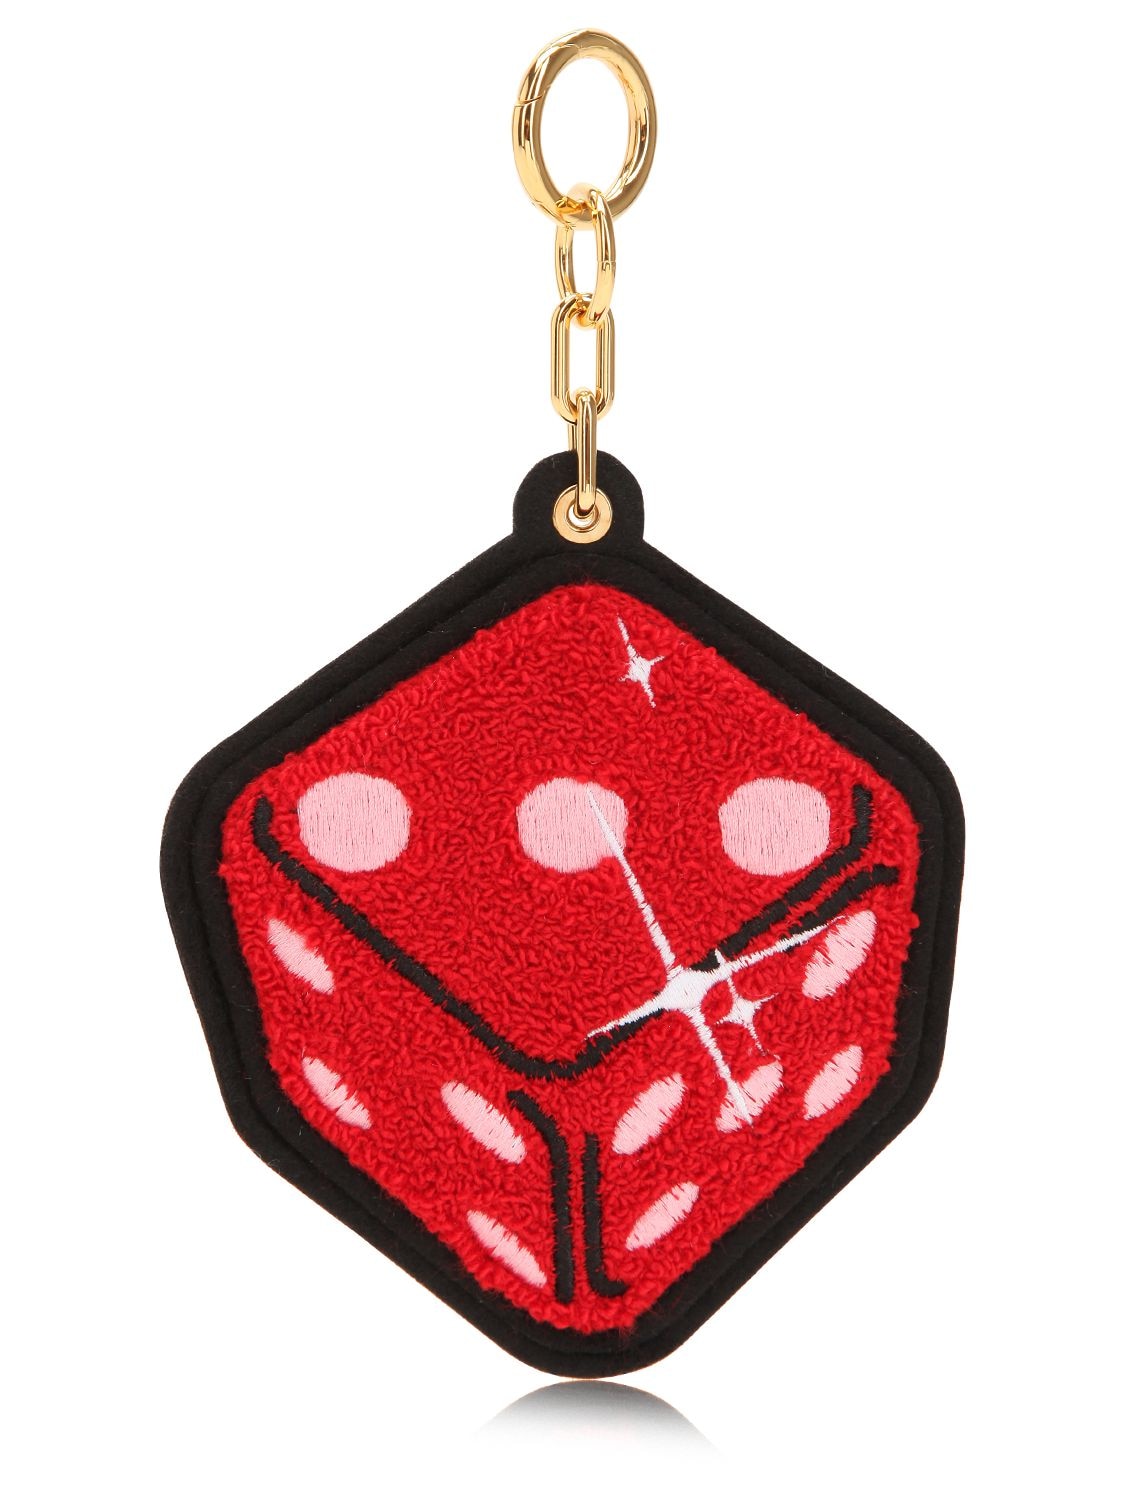 CHAOS RED DICE CHENILLE KEYCHAIN,68IWRV036-UKVE0